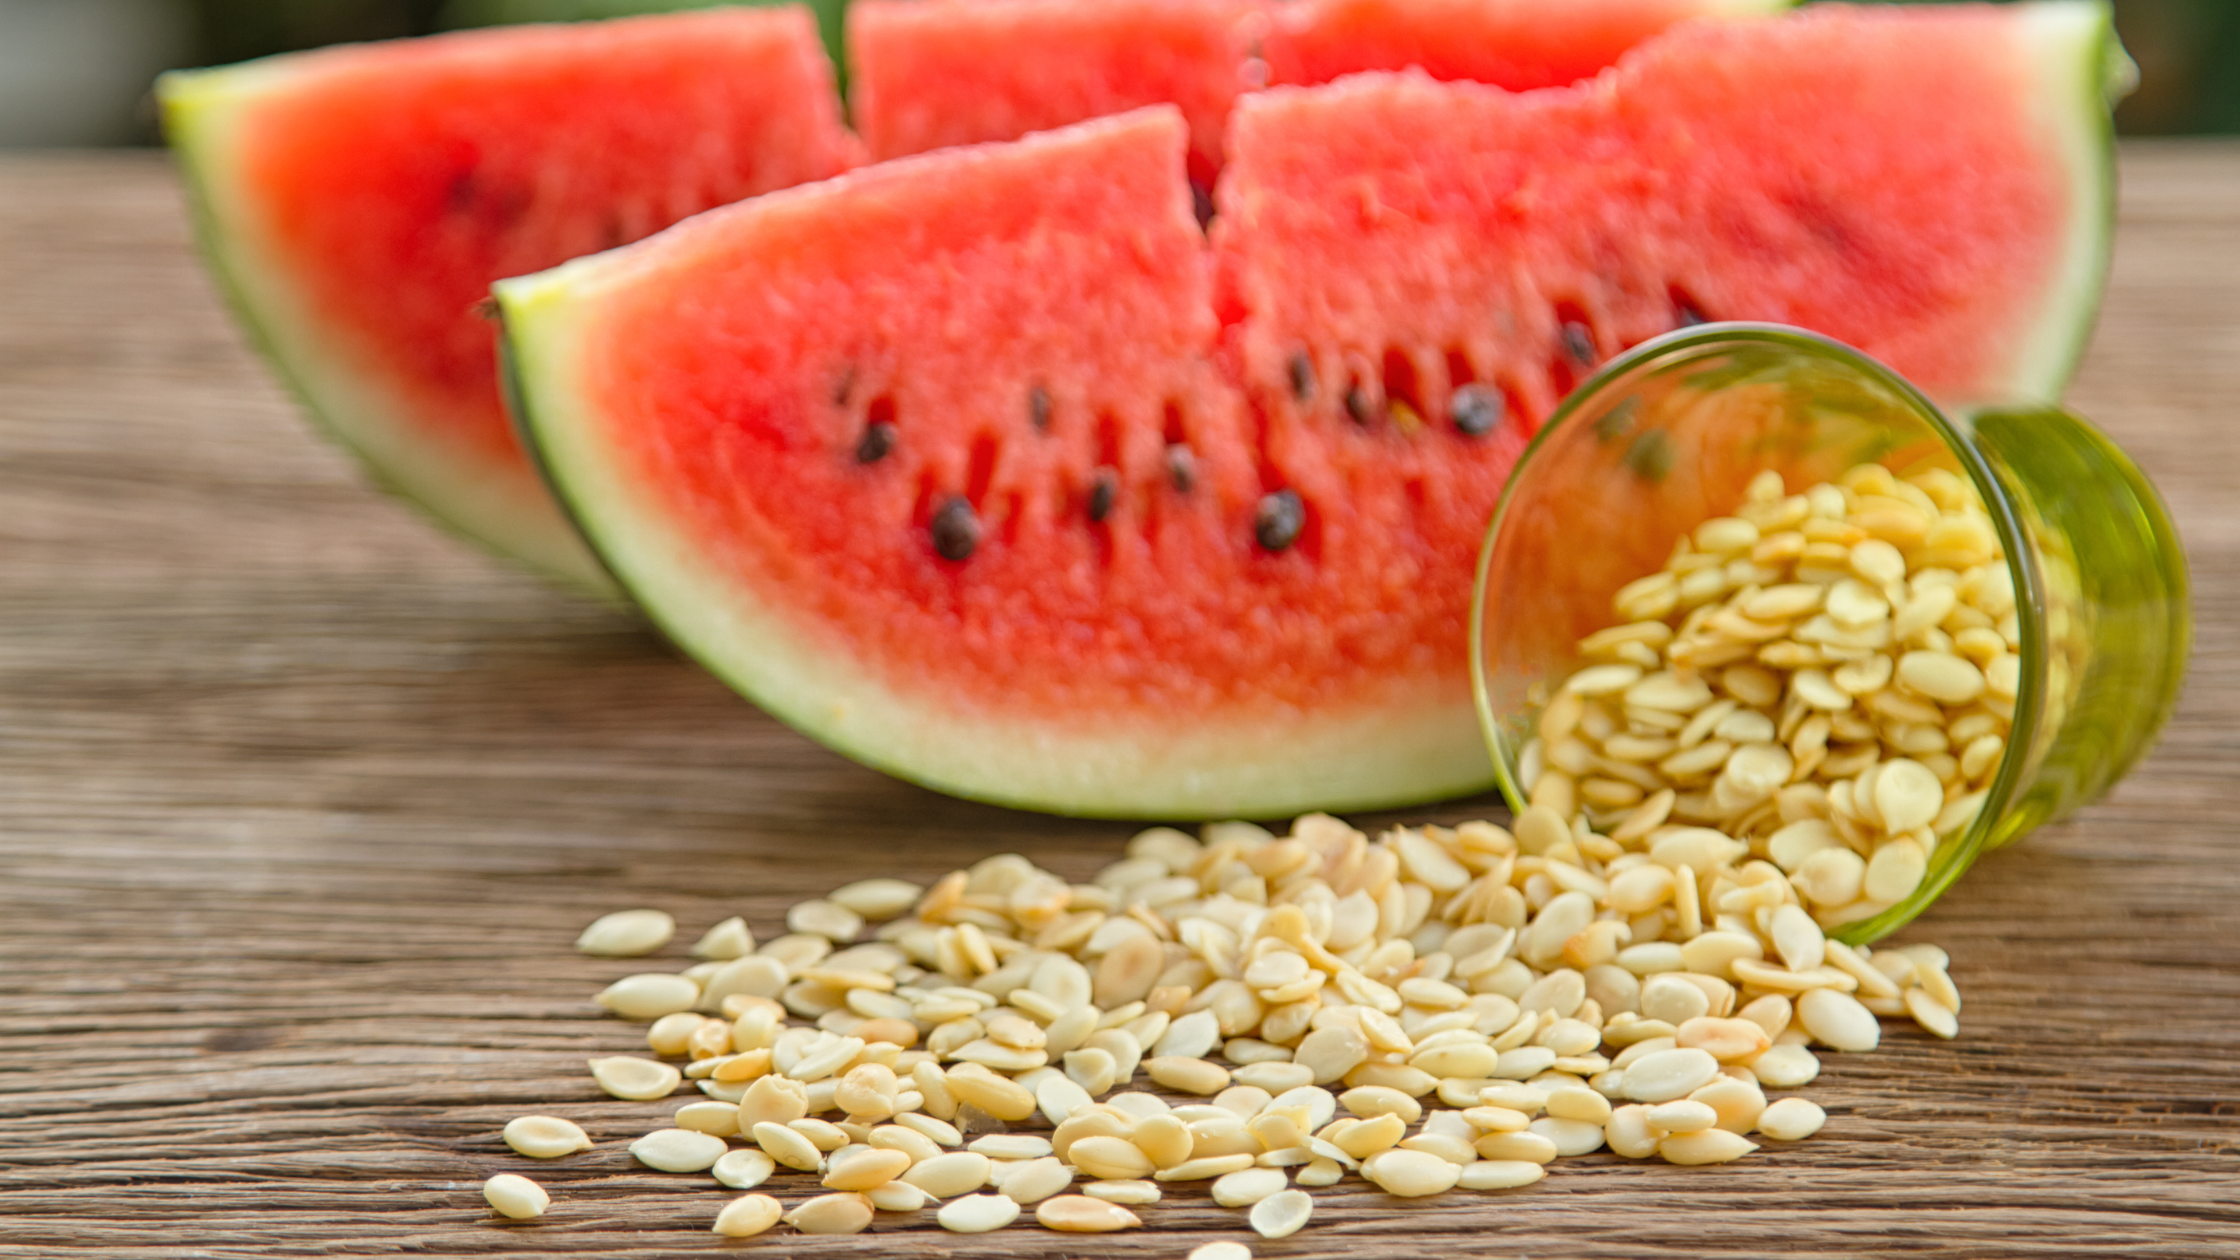 Myth 2: Watermelon seeds are harmful to consume 